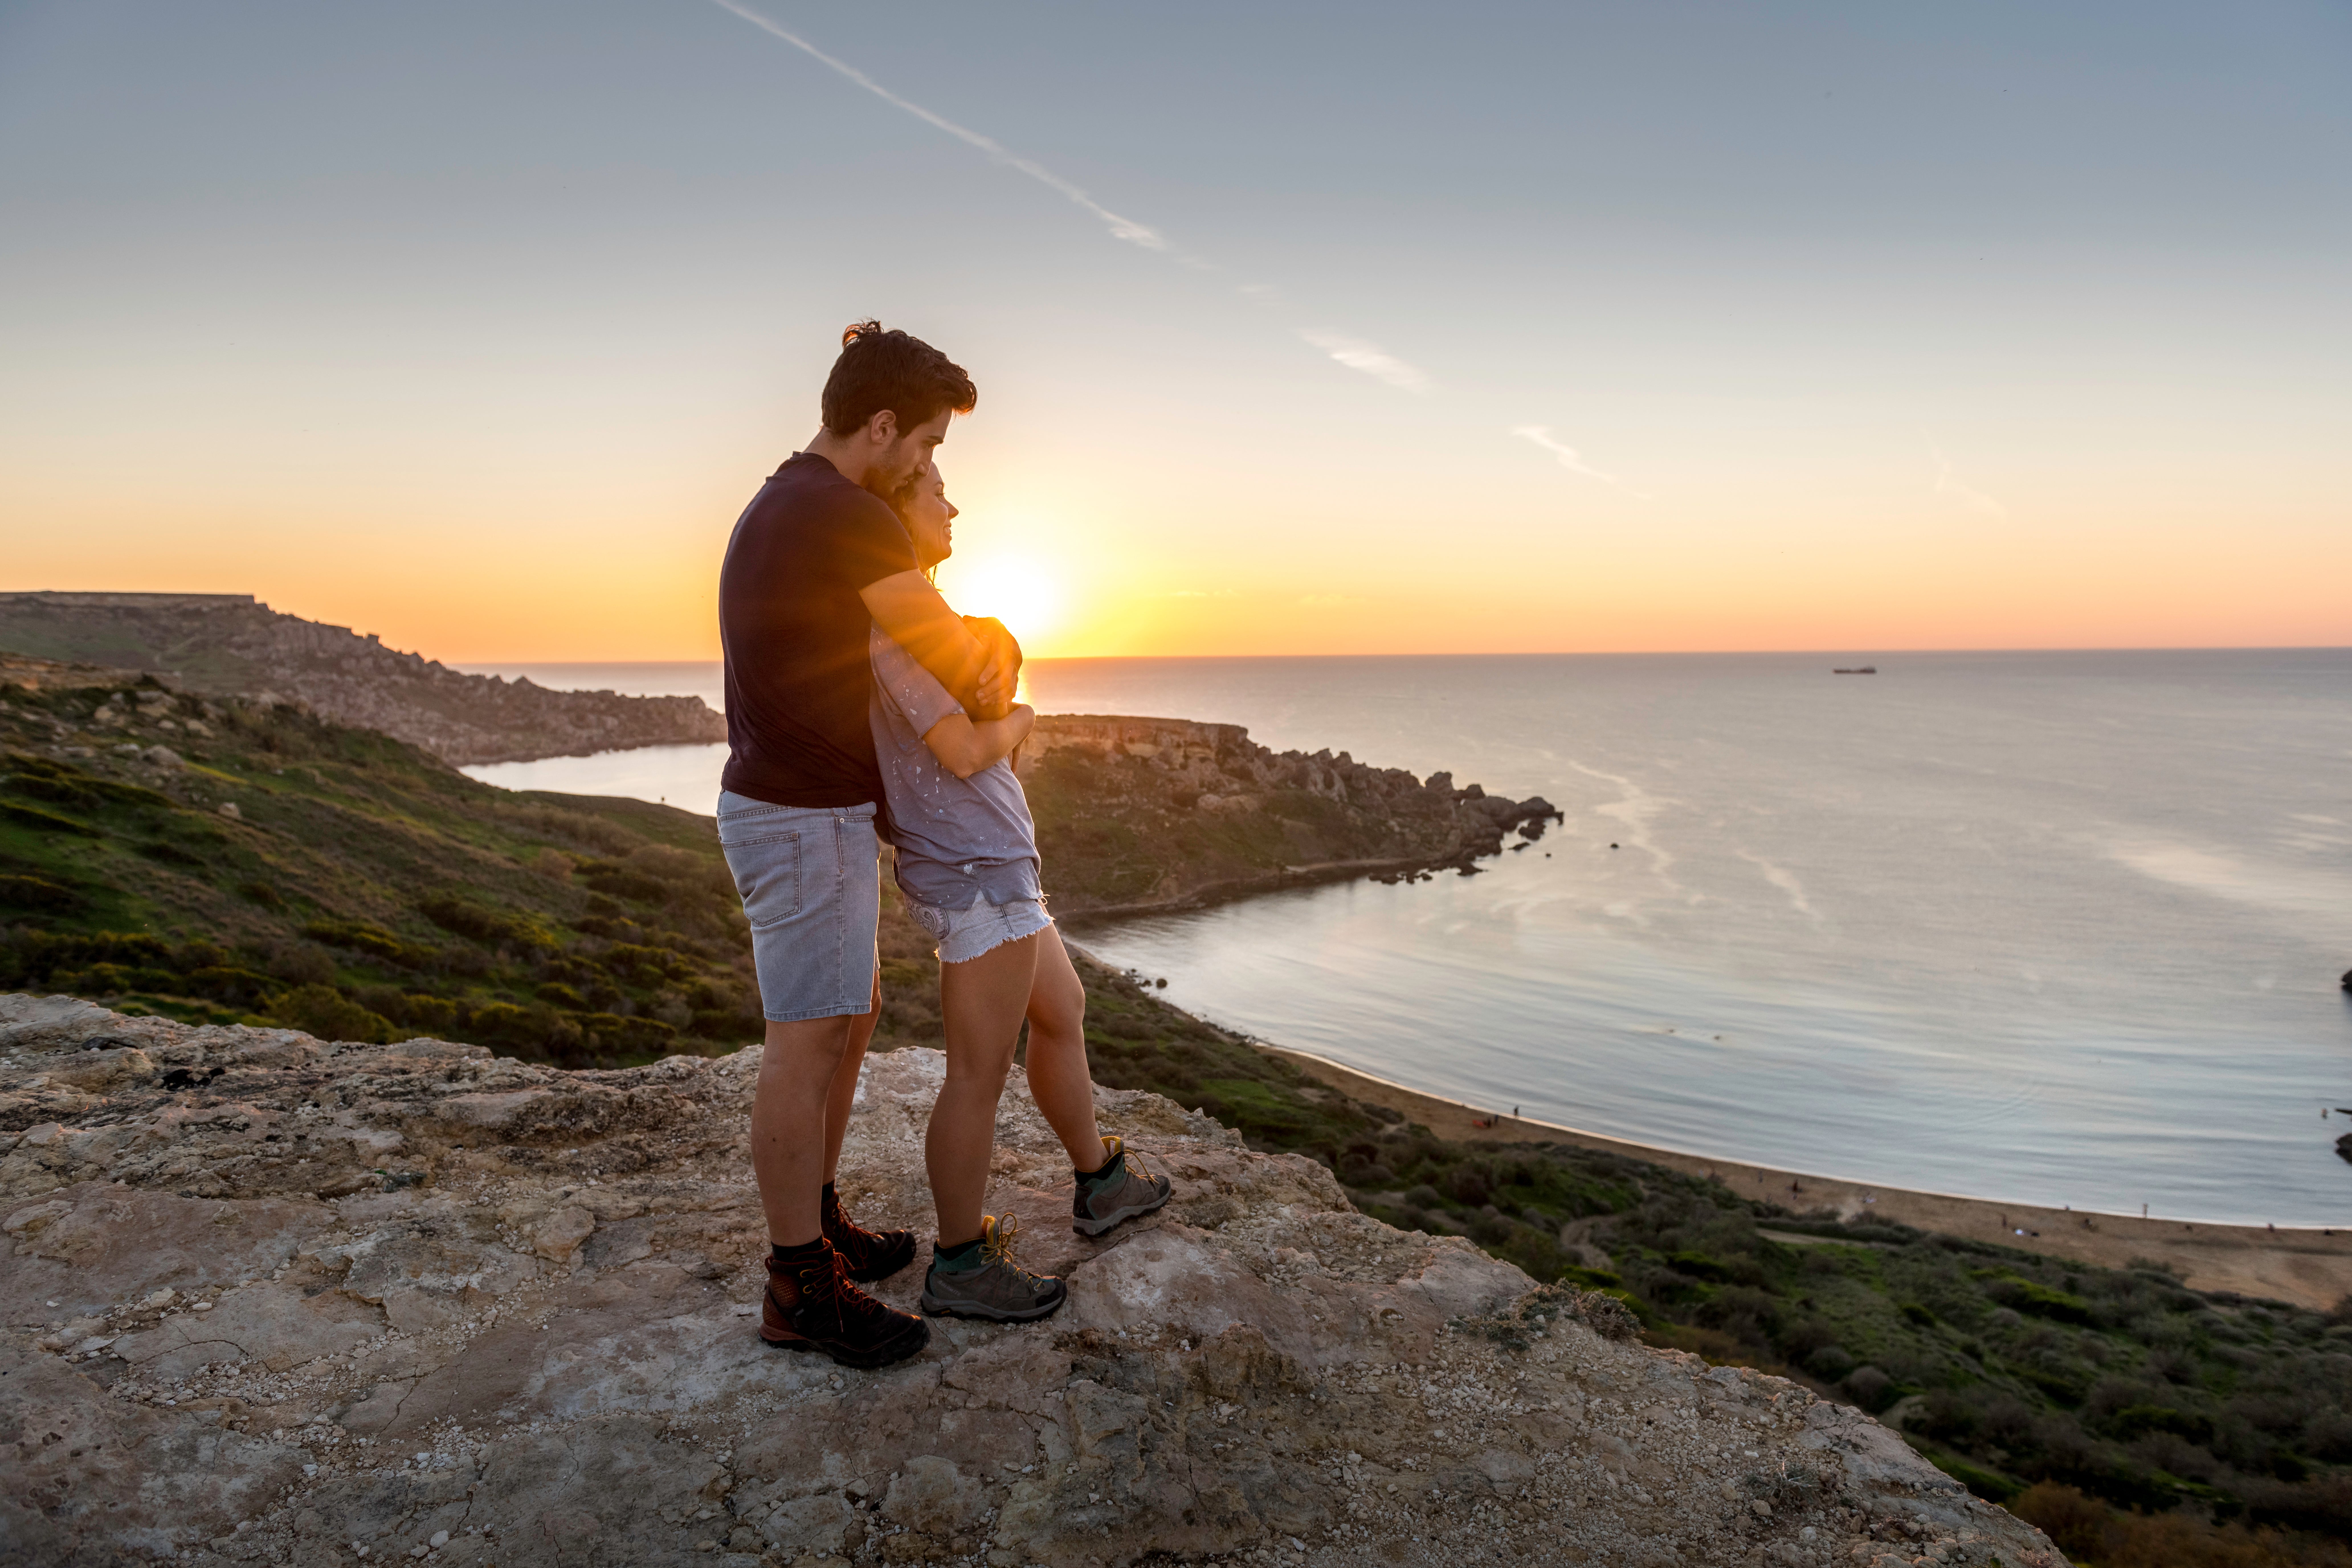 After a scenic coastal hike, relax and reward yourself with one of Malta’s stunning sunsets